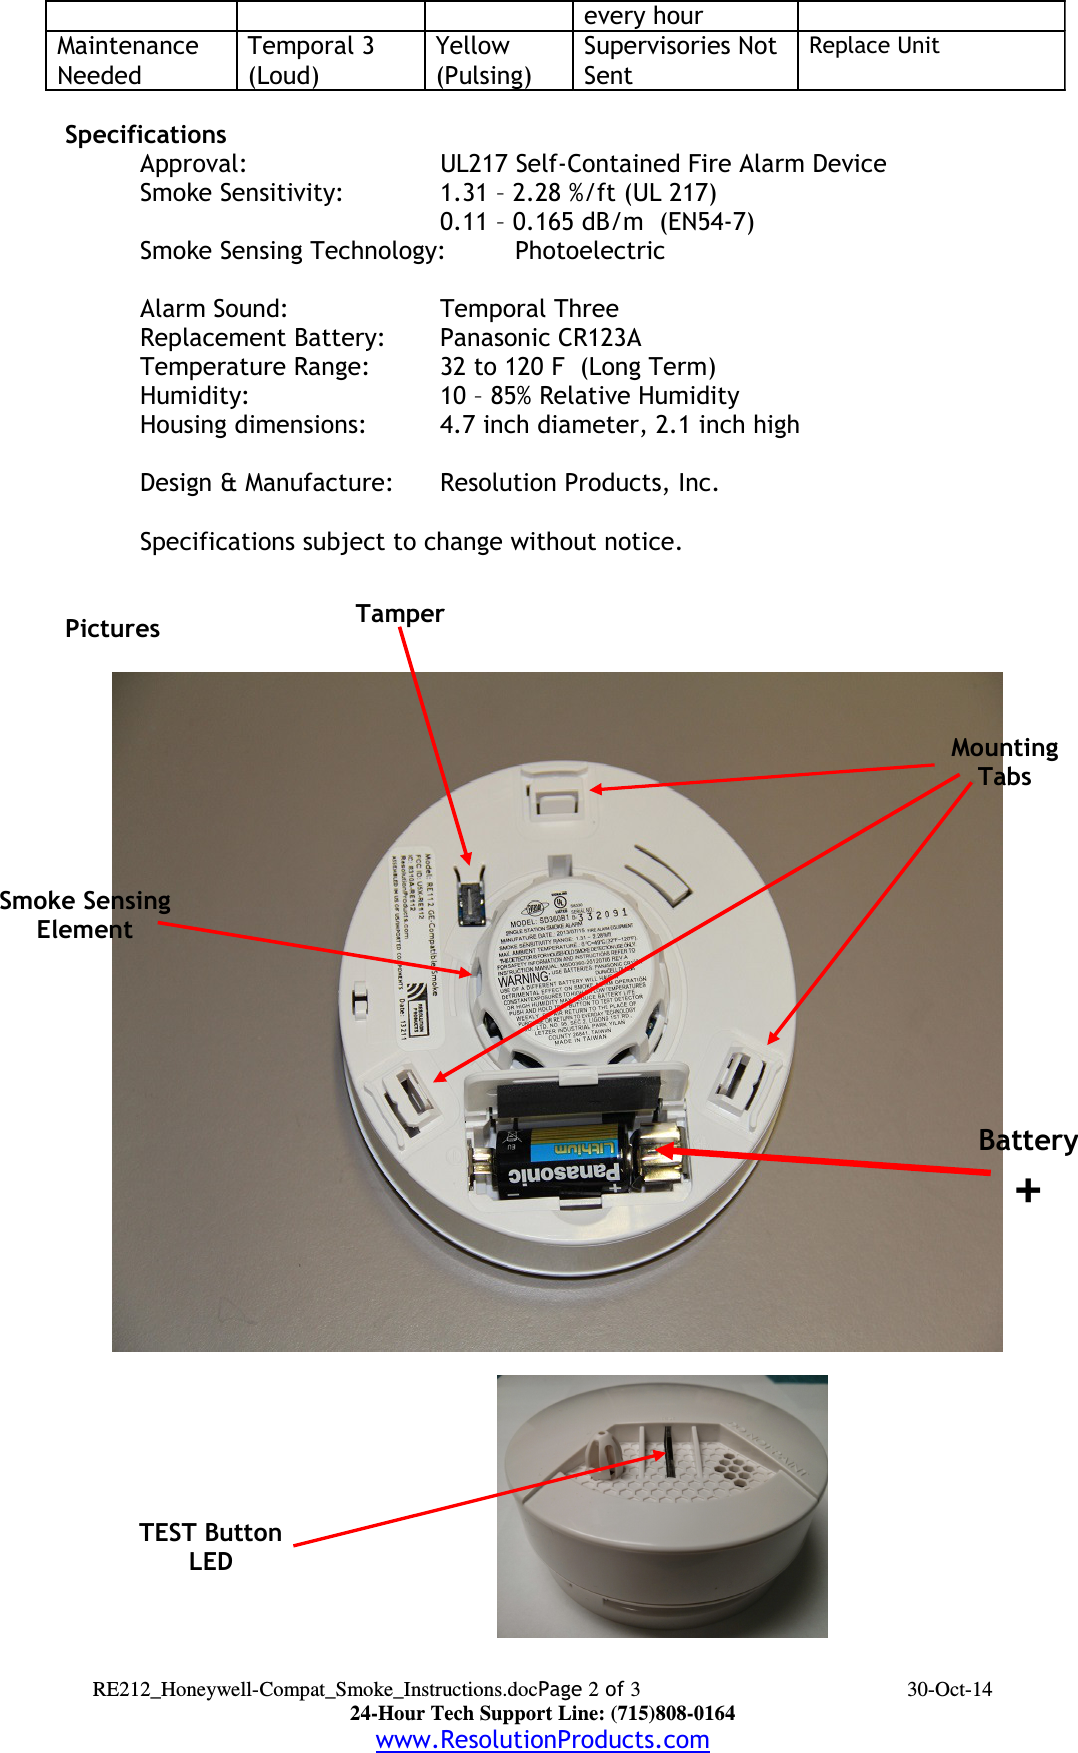 every hourMaintenance NeededTemporal 3(Loud)Yellow (Pulsing)Supervisories Not SentReplace UnitSpecifications  Approval: UL217 Self-Contained Fire Alarm DeviceSmoke Sensitivity:   1.31 – 2.28 %/ft (UL 217)0.11 – 0.165 dB/m  (EN54-7)Smoke Sensing Technology: PhotoelectricHeat Alarm Point: 135 – 149 F  (UL 521)Alarm Sound: Temporal ThreeReplacement Battery: Panasonic CR123ATemperature Range: 32 to 120 F  (Long Term)Humidity: 10 – 85% Relative HumidityHousing dimensions: 4.7 inch diameter, 2.1 inch highDesign &amp; Manufacture:  Resolution Products, Inc.Specifications subject to change without notice.PicturesRE212_Honeywell-Compat_Smoke_Instructions.docPage 2 of 3 30-Oct-1424-Hour Tech Support Line: (715)808-0164www.ResolutionProducts.comTEST ButtonLEDBattery+Smoke SensingElementMountingTabsTamper